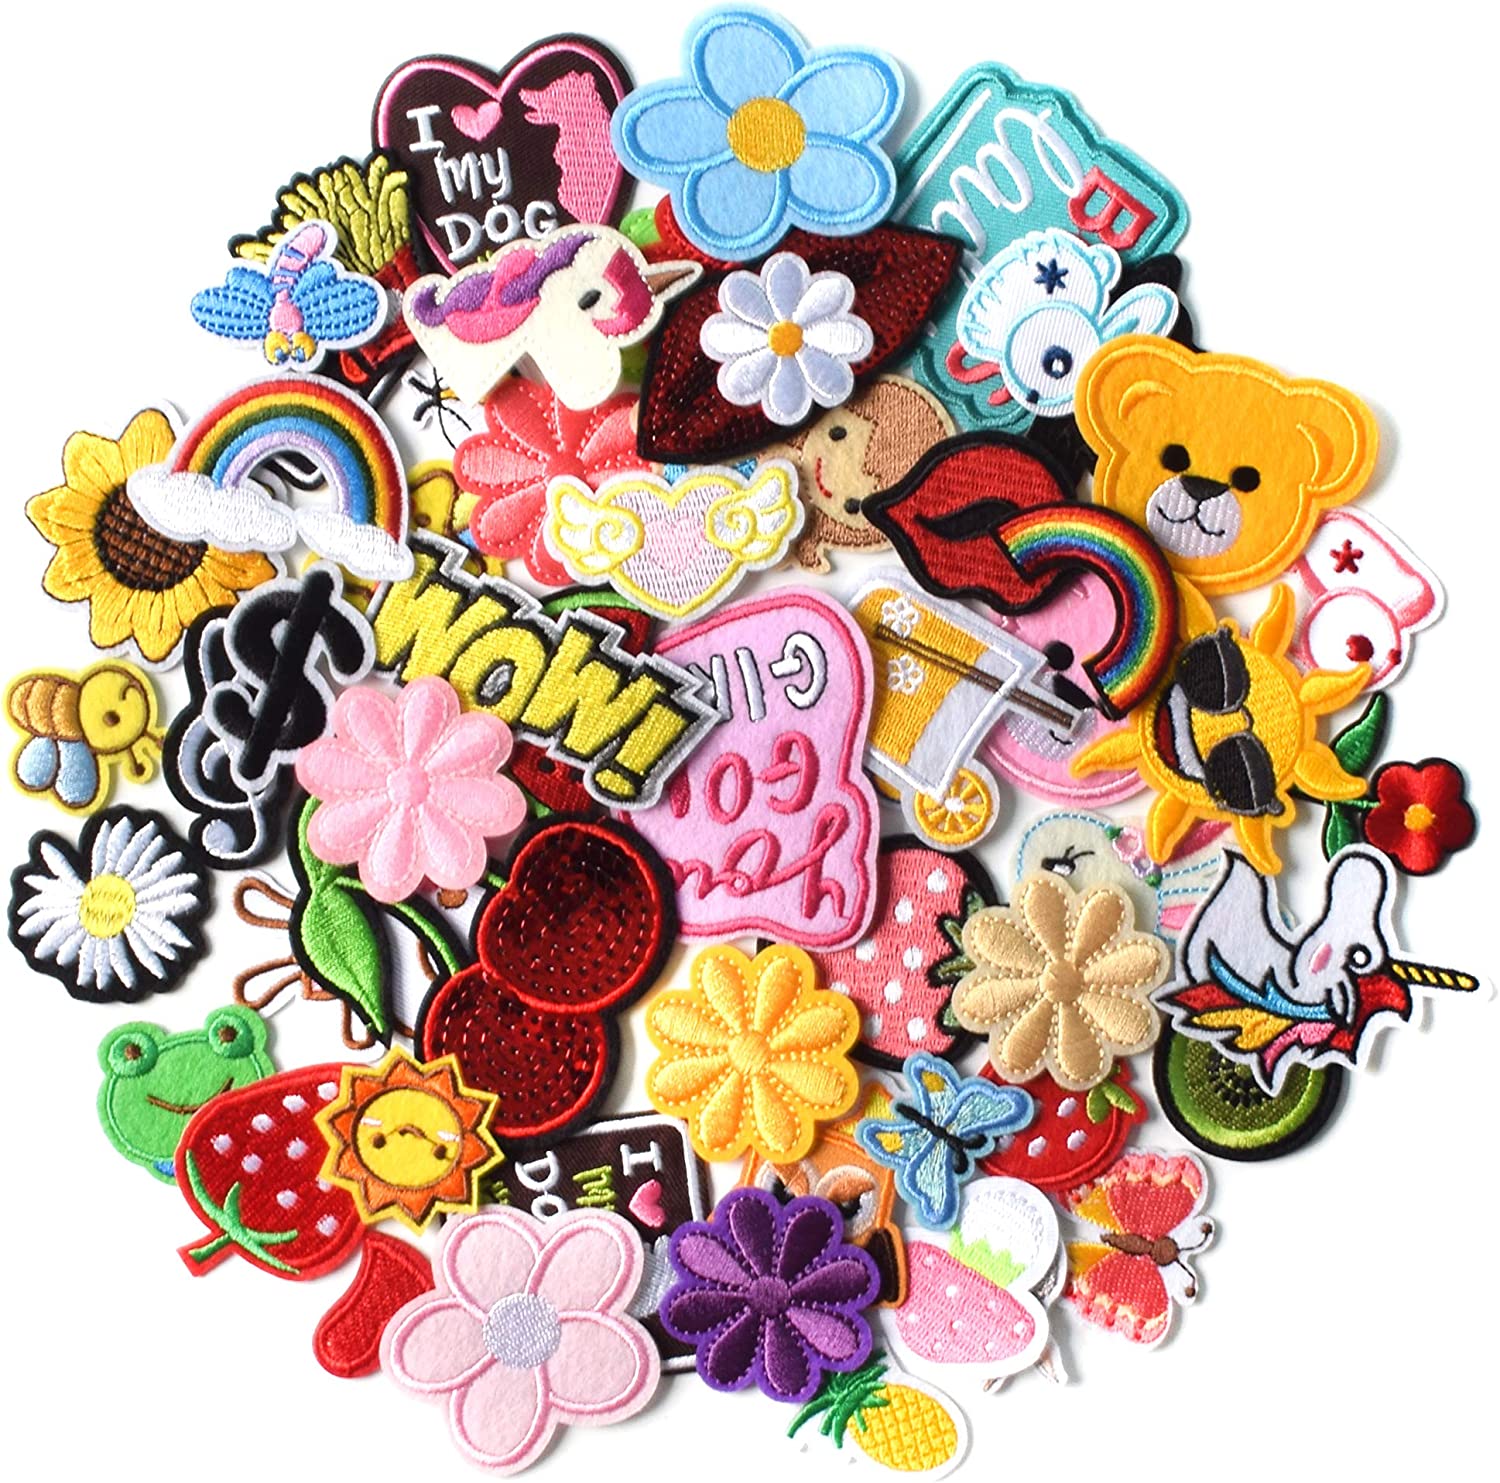 12 Iron on Kawaii Patches – The Carefree Bee | Kids Iron on Patches Cute  Iron on Patches for Little Girls Backpack Decorations for Kids Patches for